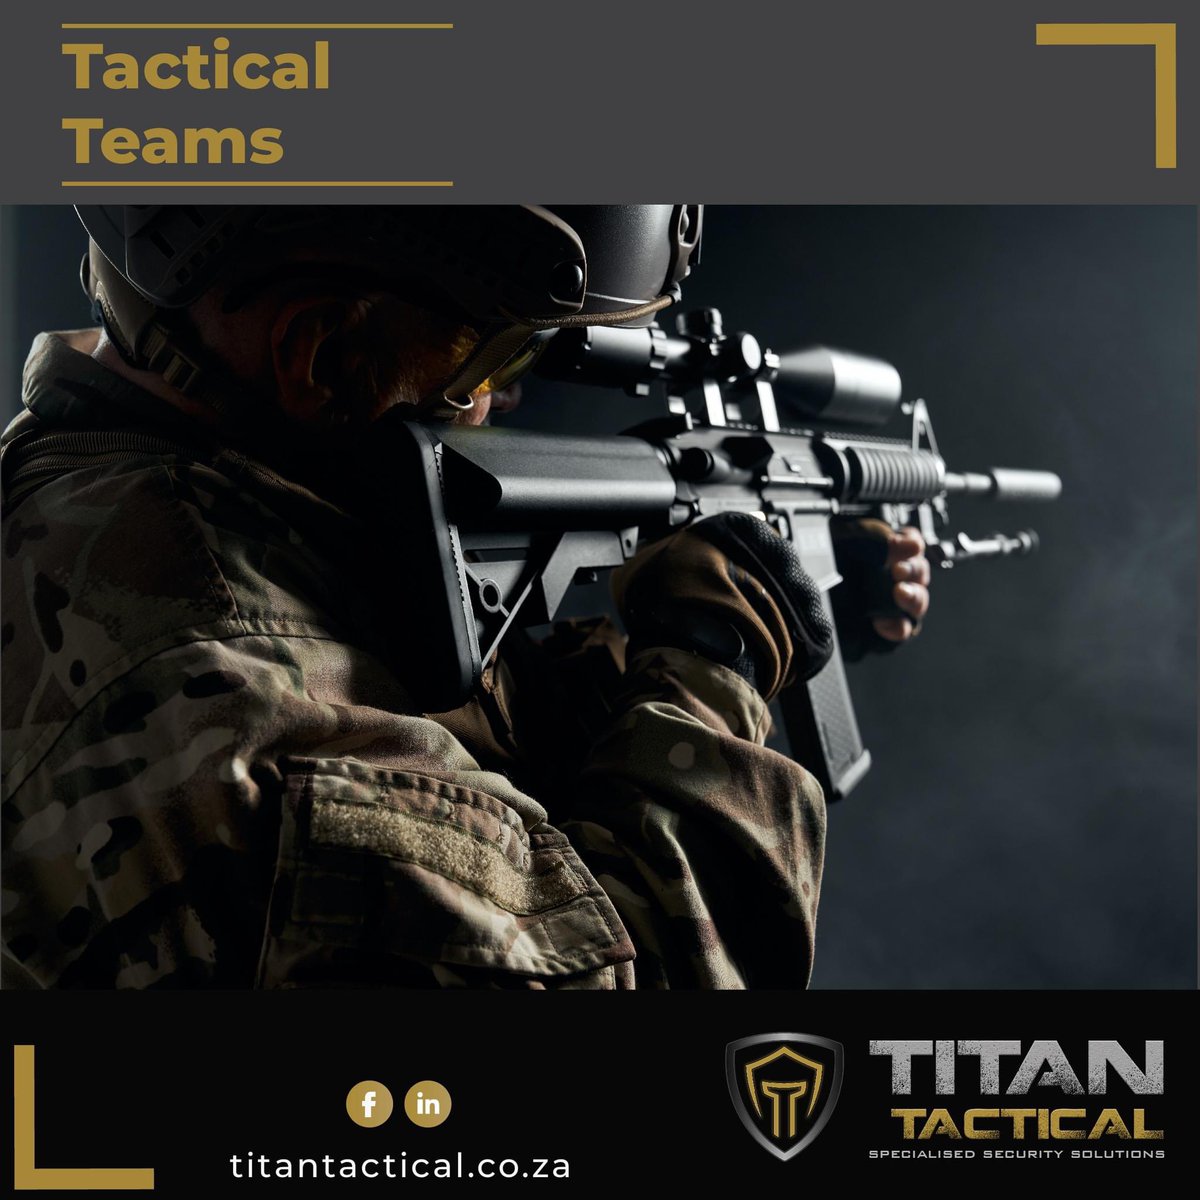 👊 Titan Tactical's Tactical Teams are the epitome of precision and skill. When you need security solutions that exceed expectations, trust our expert teams. #TacticalTeams #SecurityExperts #TitanTactical